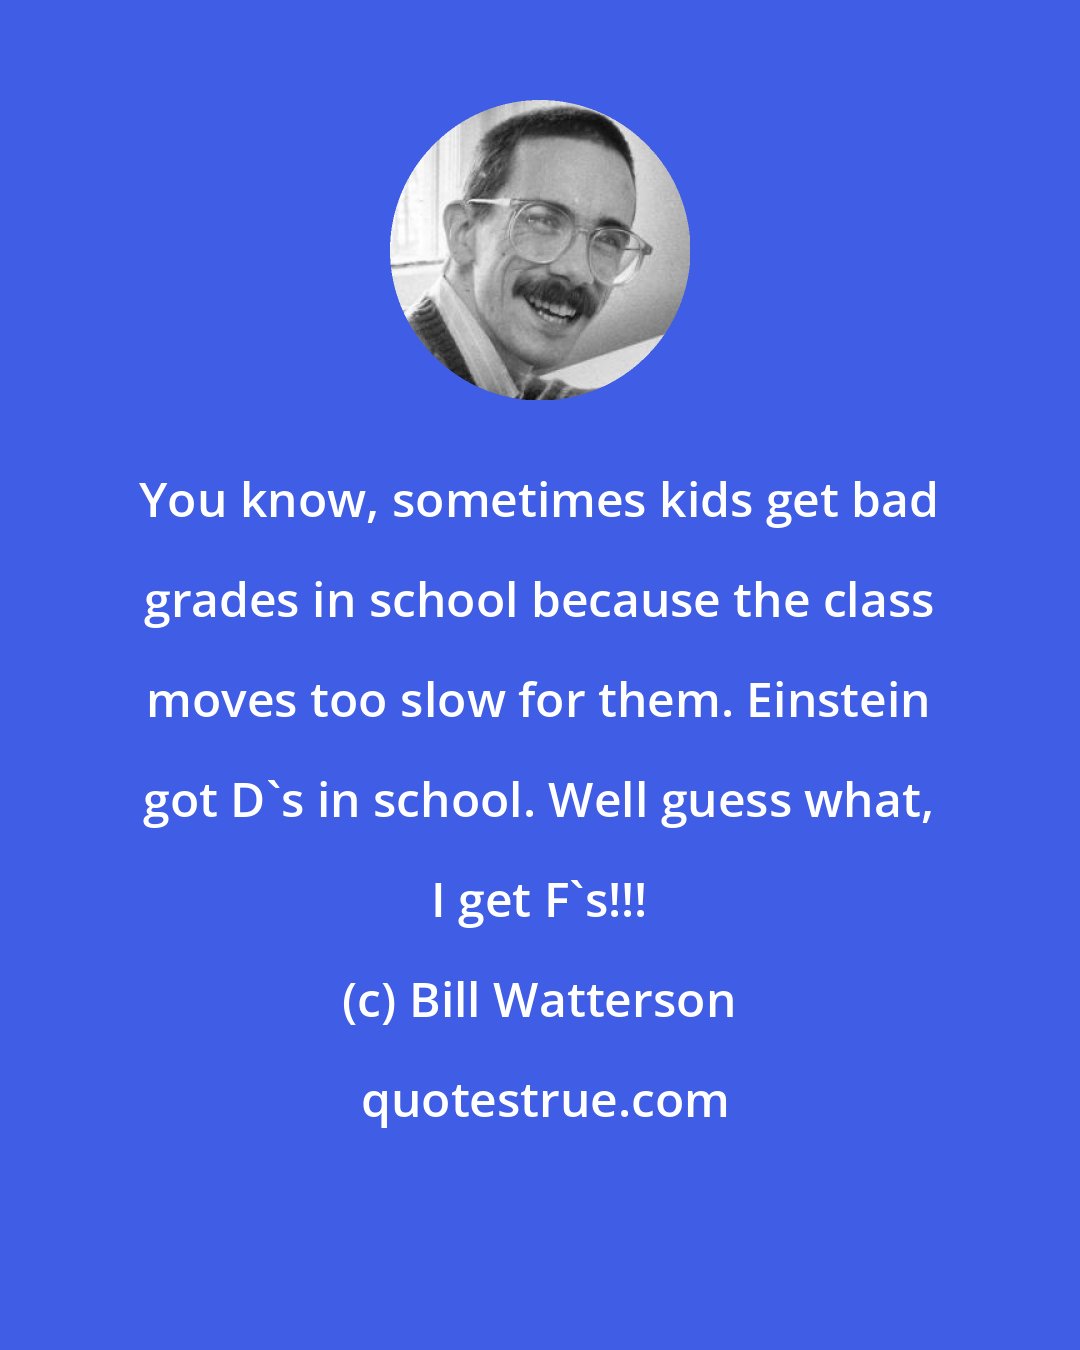 Bill Watterson: You know, sometimes kids get bad grades in school because the class moves too slow for them. Einstein got D's in school. Well guess what, I get F's!!!